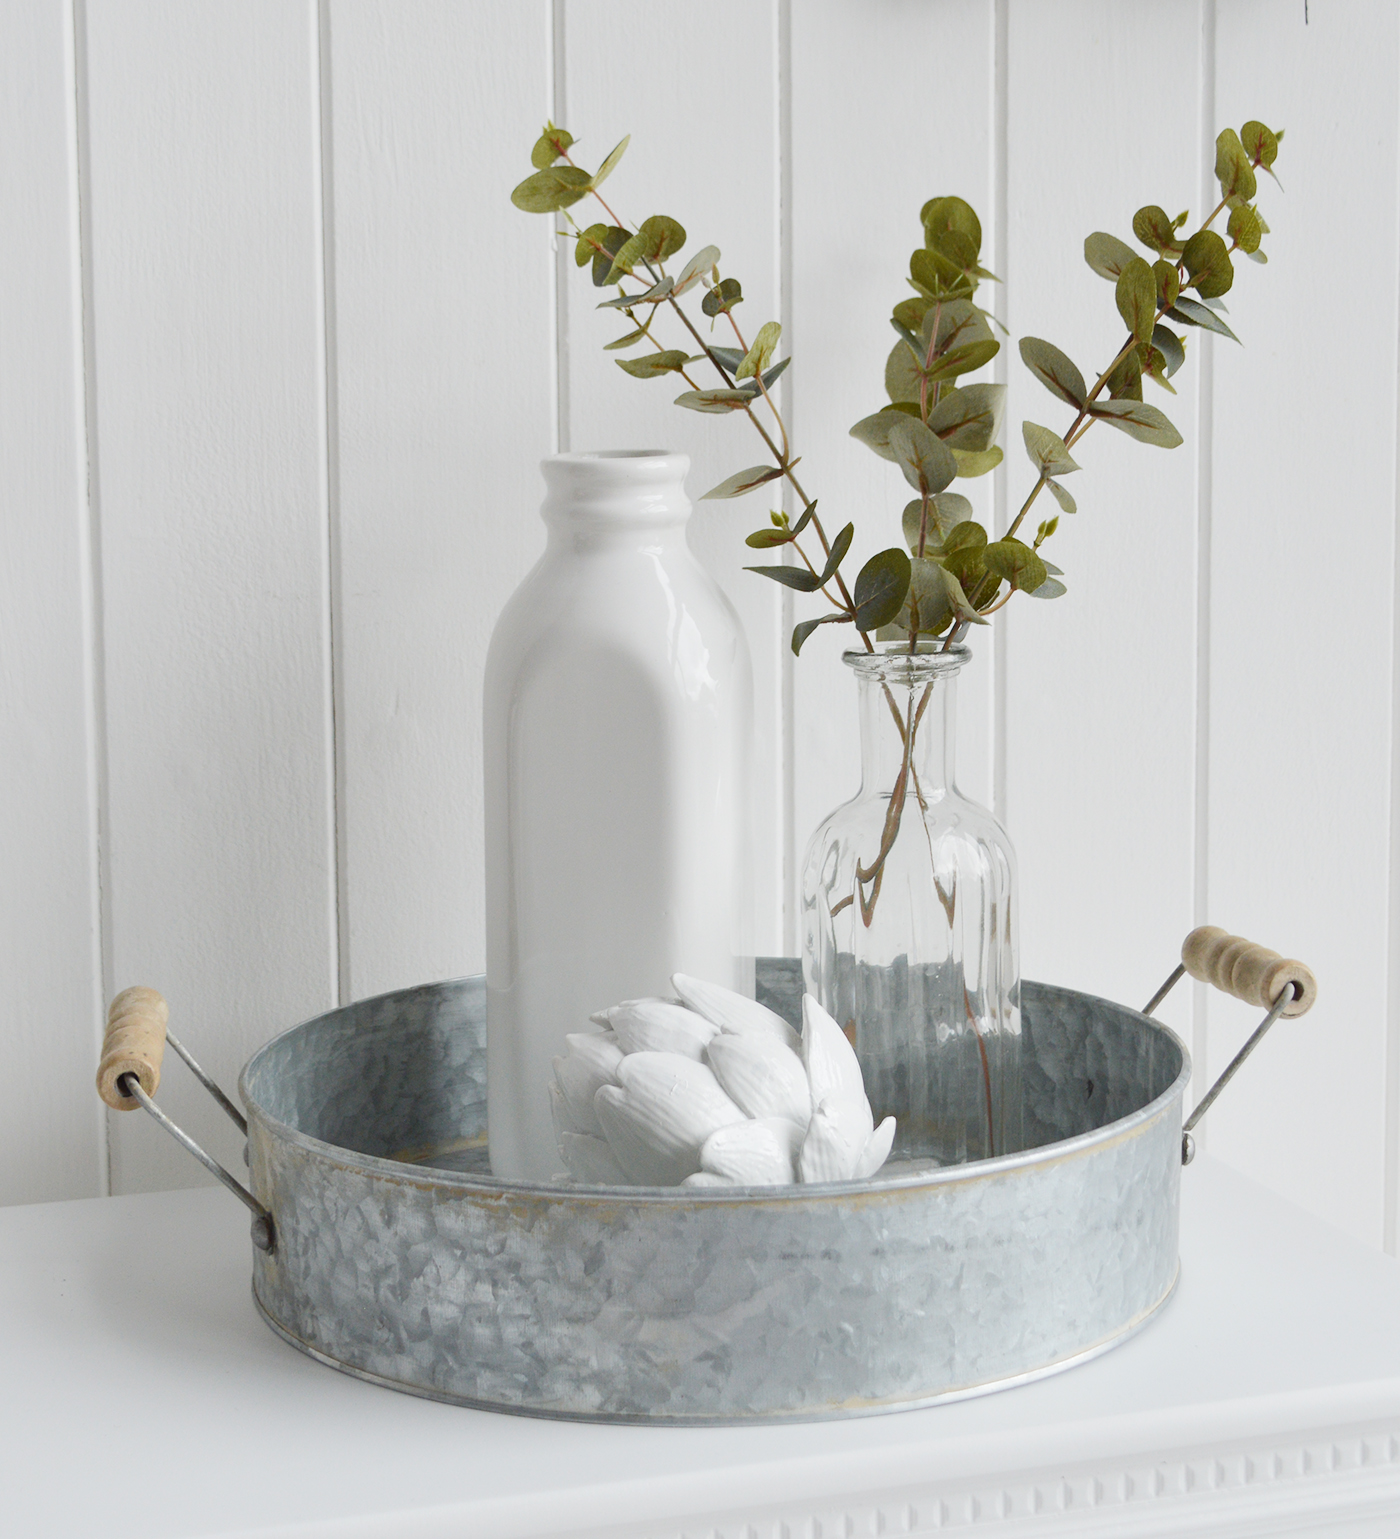 White Furniture and accessories for the home. Norfolk zinc tray with wooden handles for New England, Country and coastal home interior decor